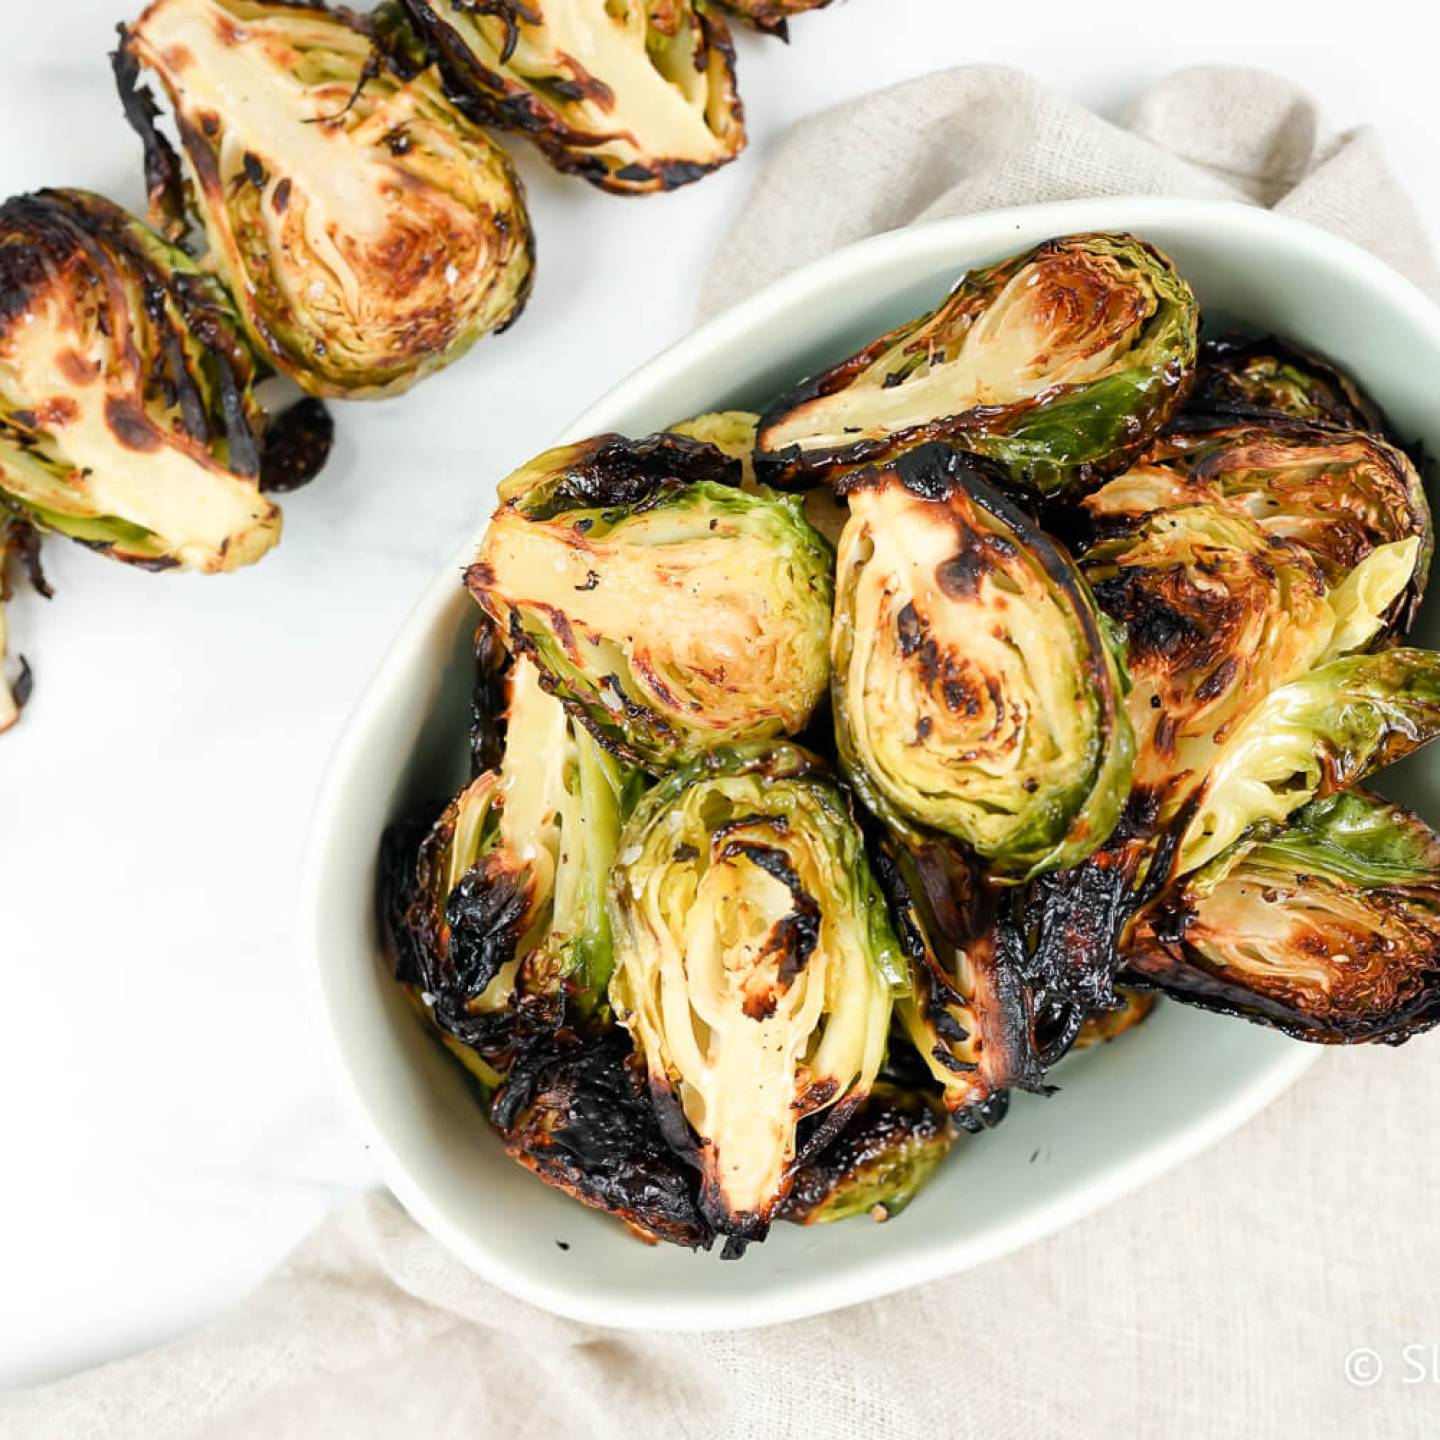 Grilled Brussel Sprouts on a skewer and in a bowl with grill marks.